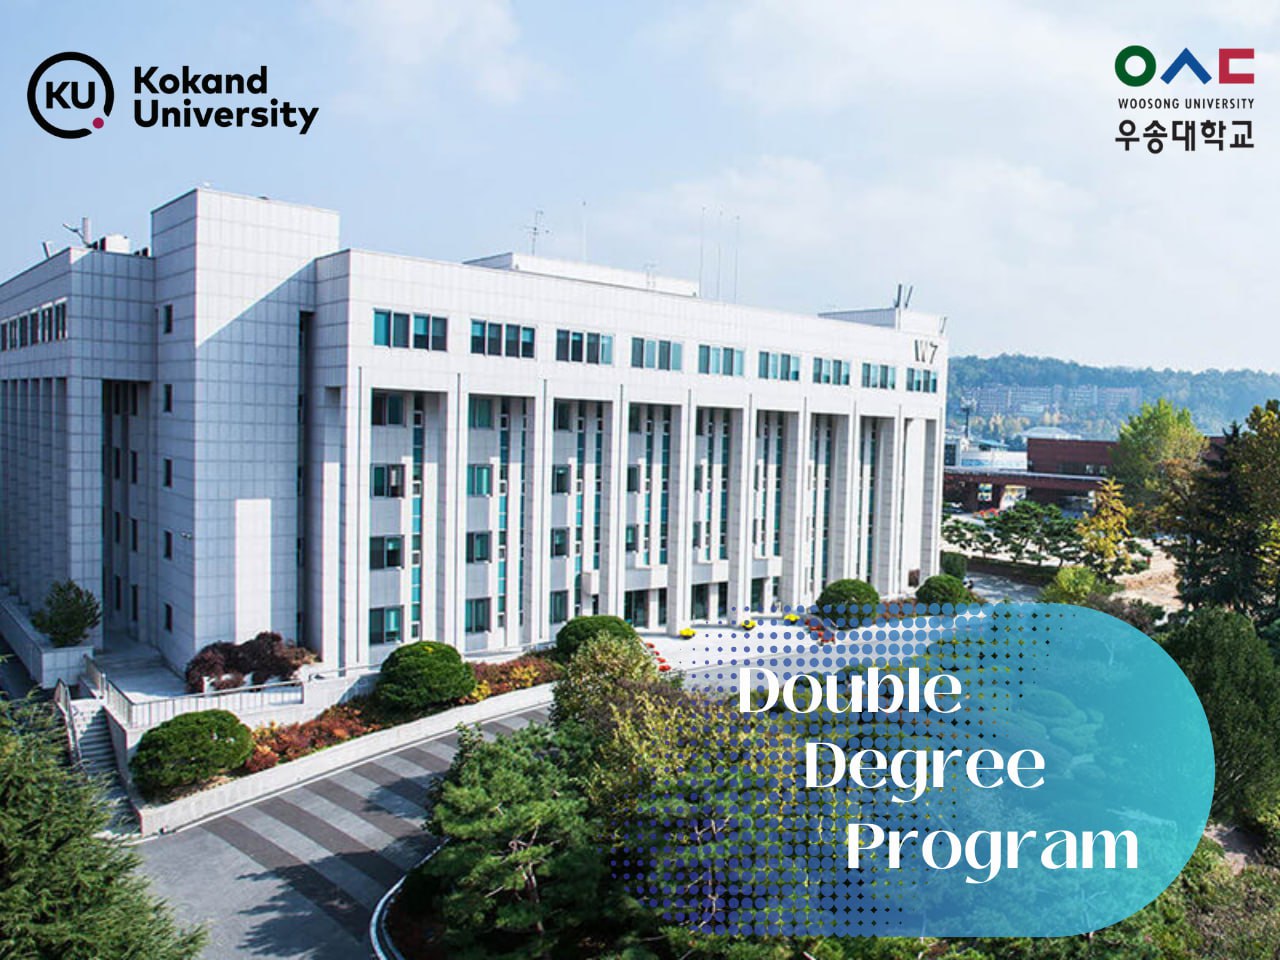 Continue your education at a prestigious university in South Korea and earn a dual degree from both Kokand University and Woosong University!